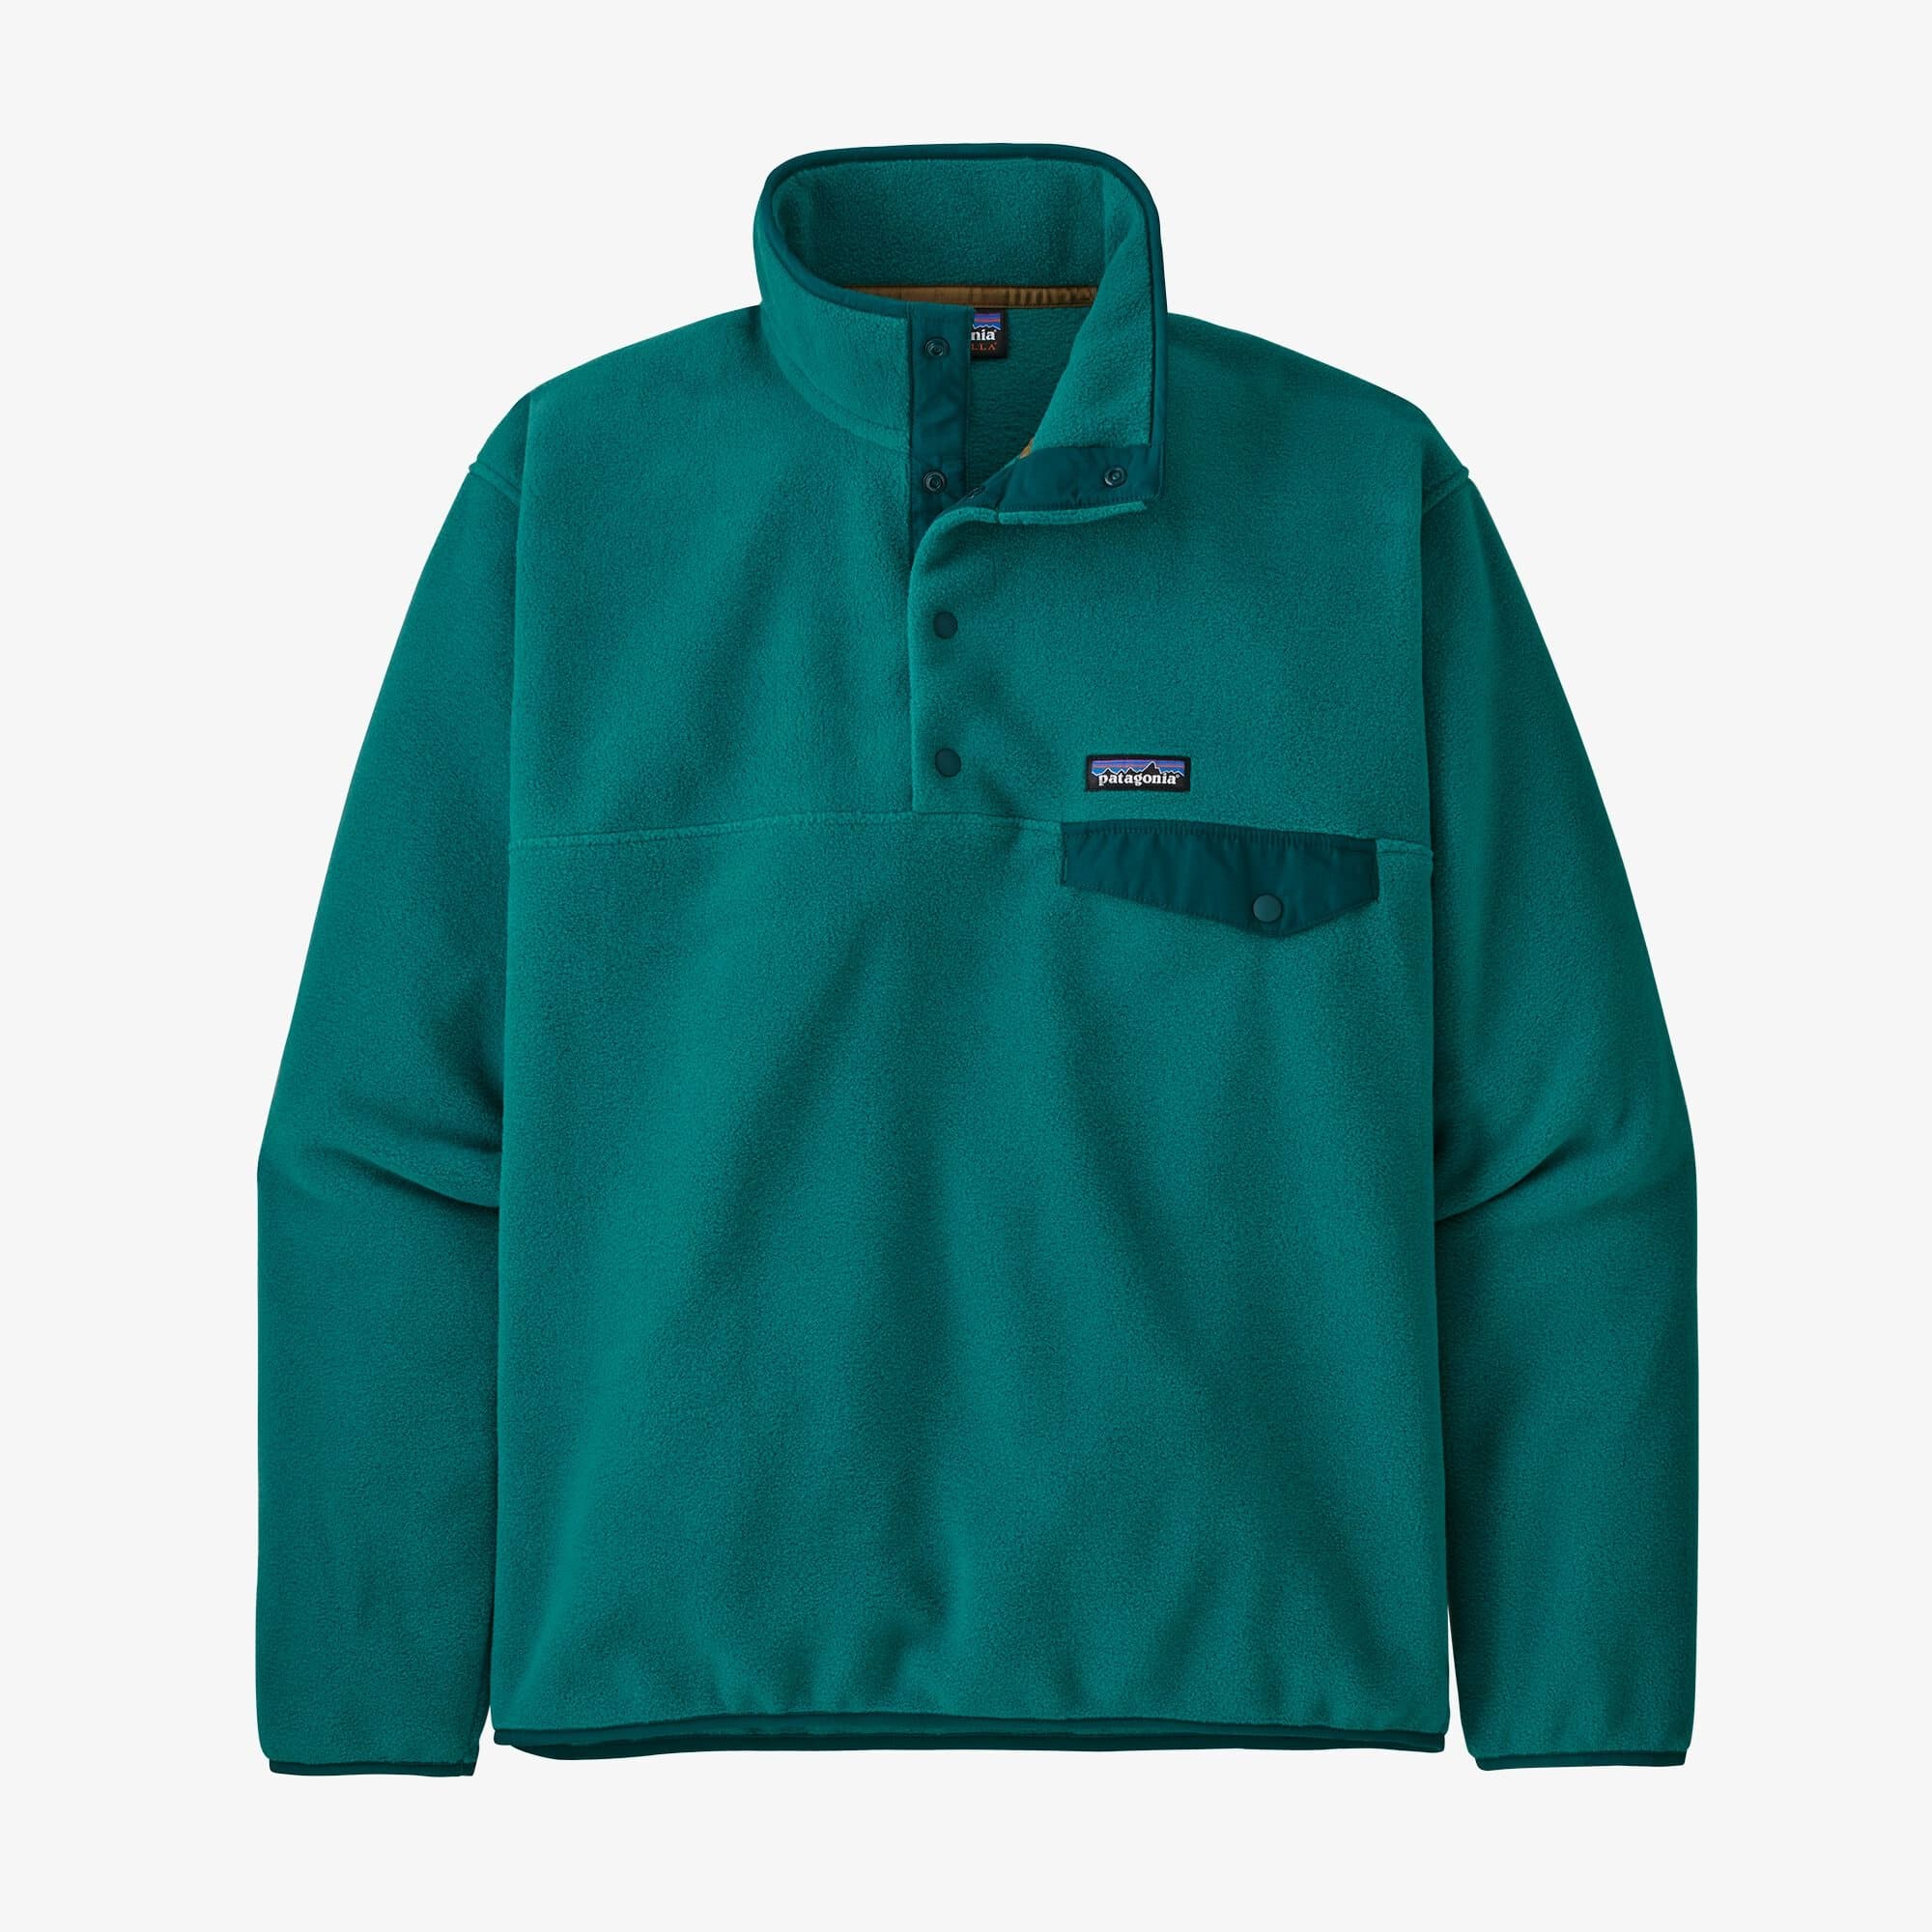 Patagonia's Snap-T pullover